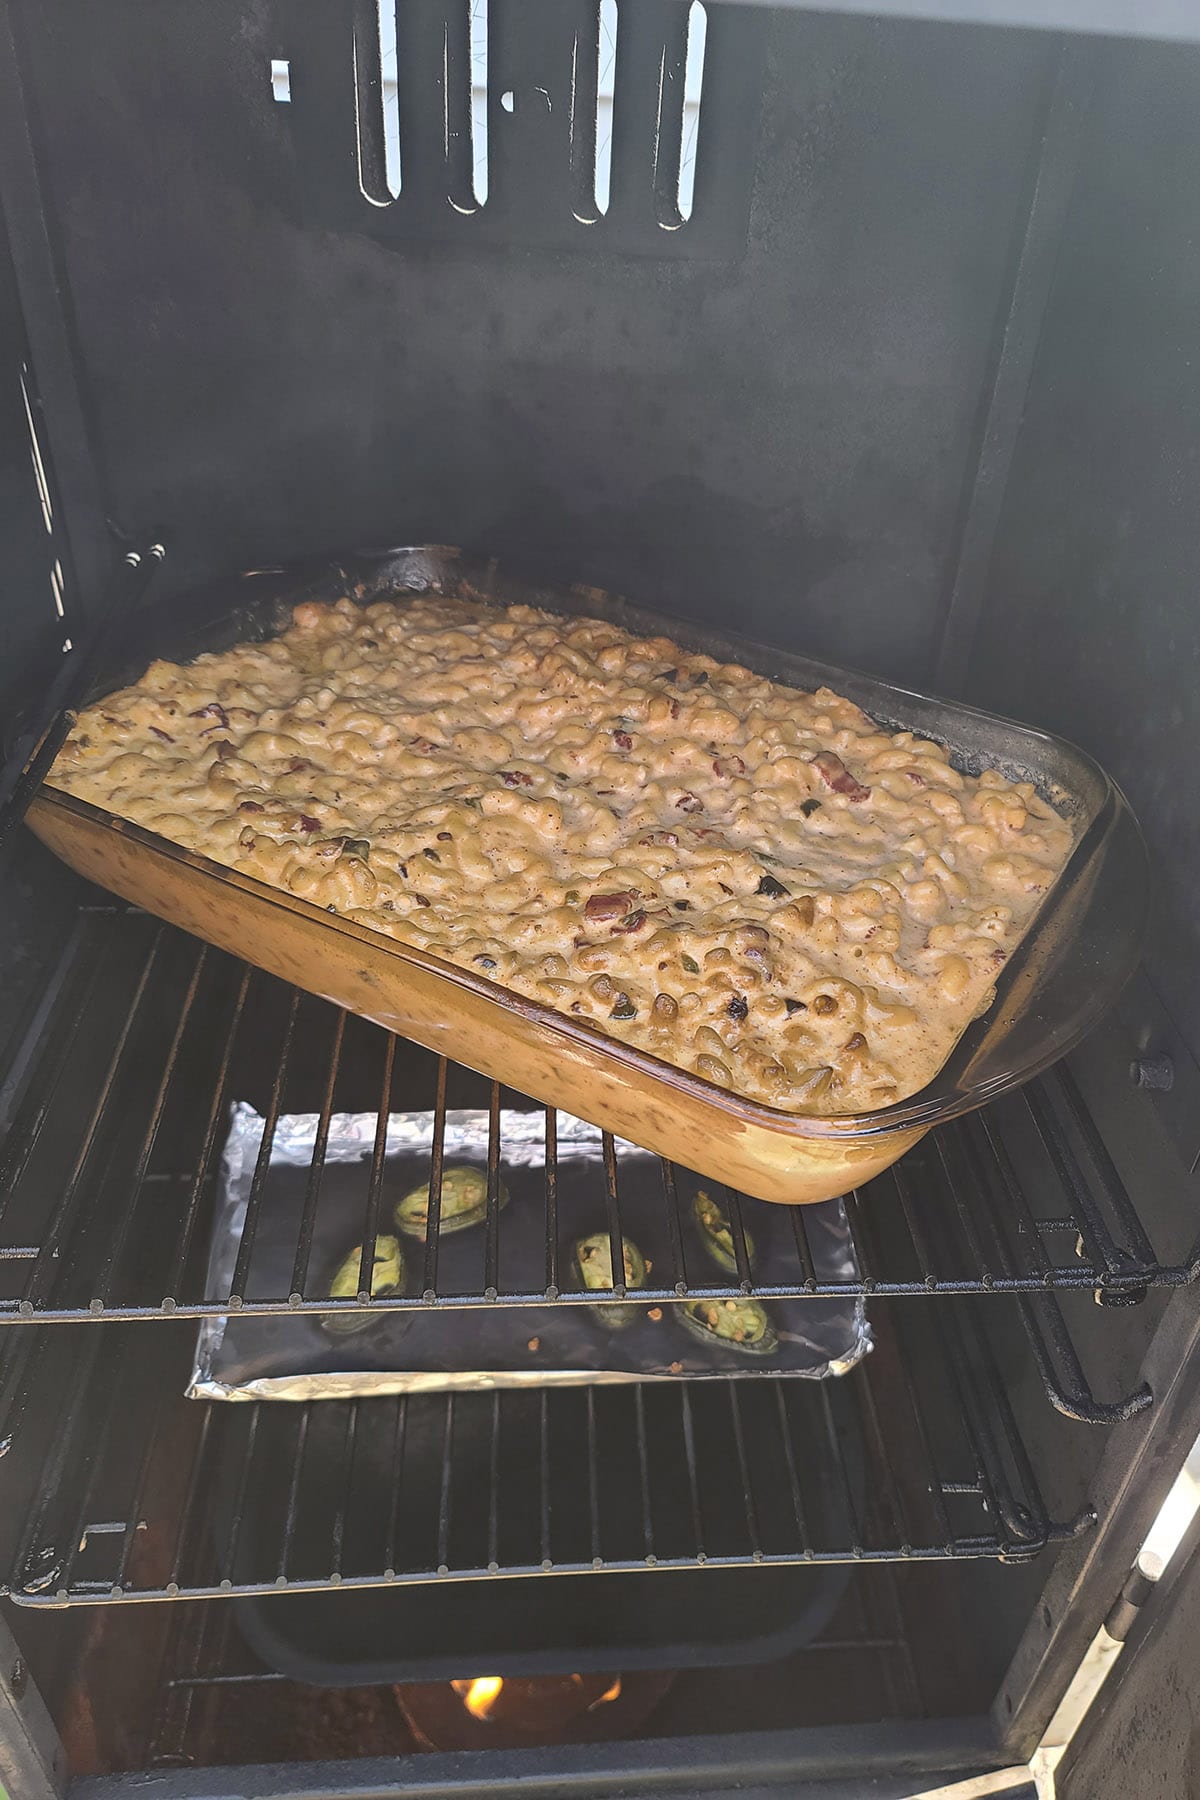 The pan of mac and cheese in the smoker.